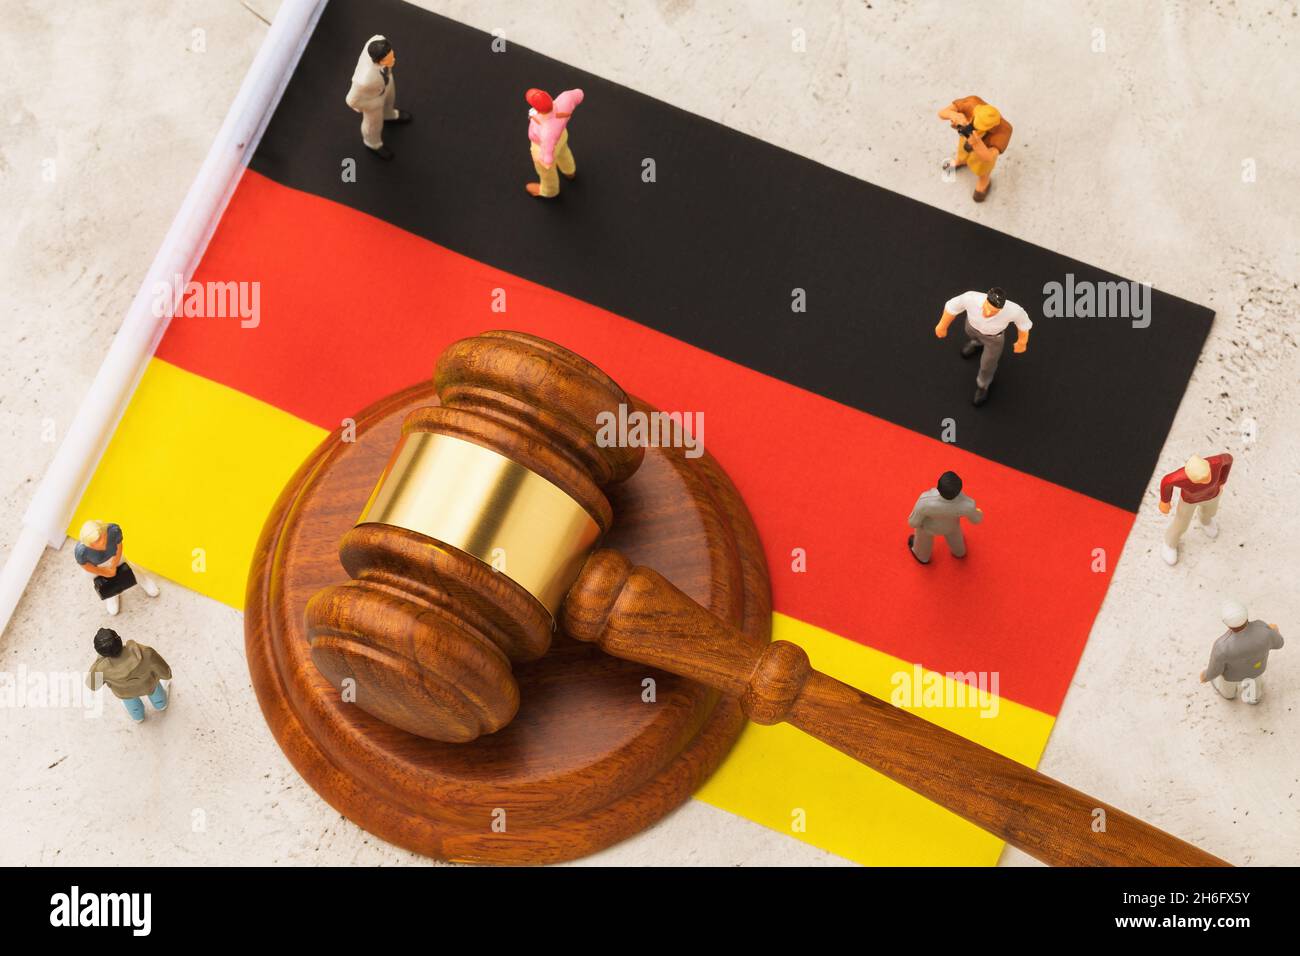 German Lawyer High Resolution Stock Photography and Images - Alamy